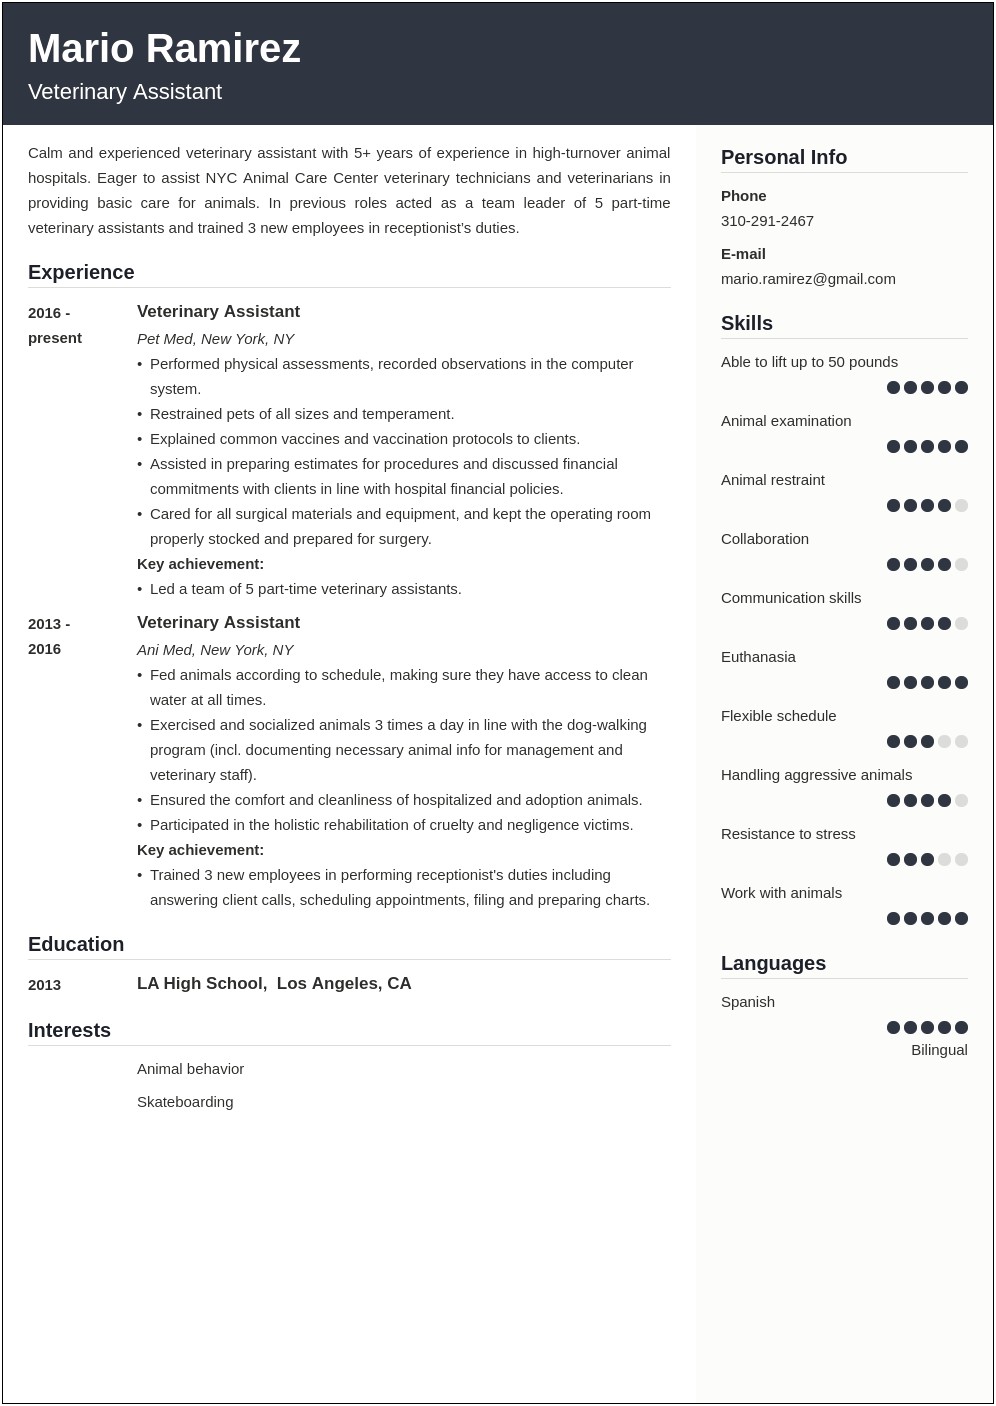 Resume Example For Veterinary Receptionist